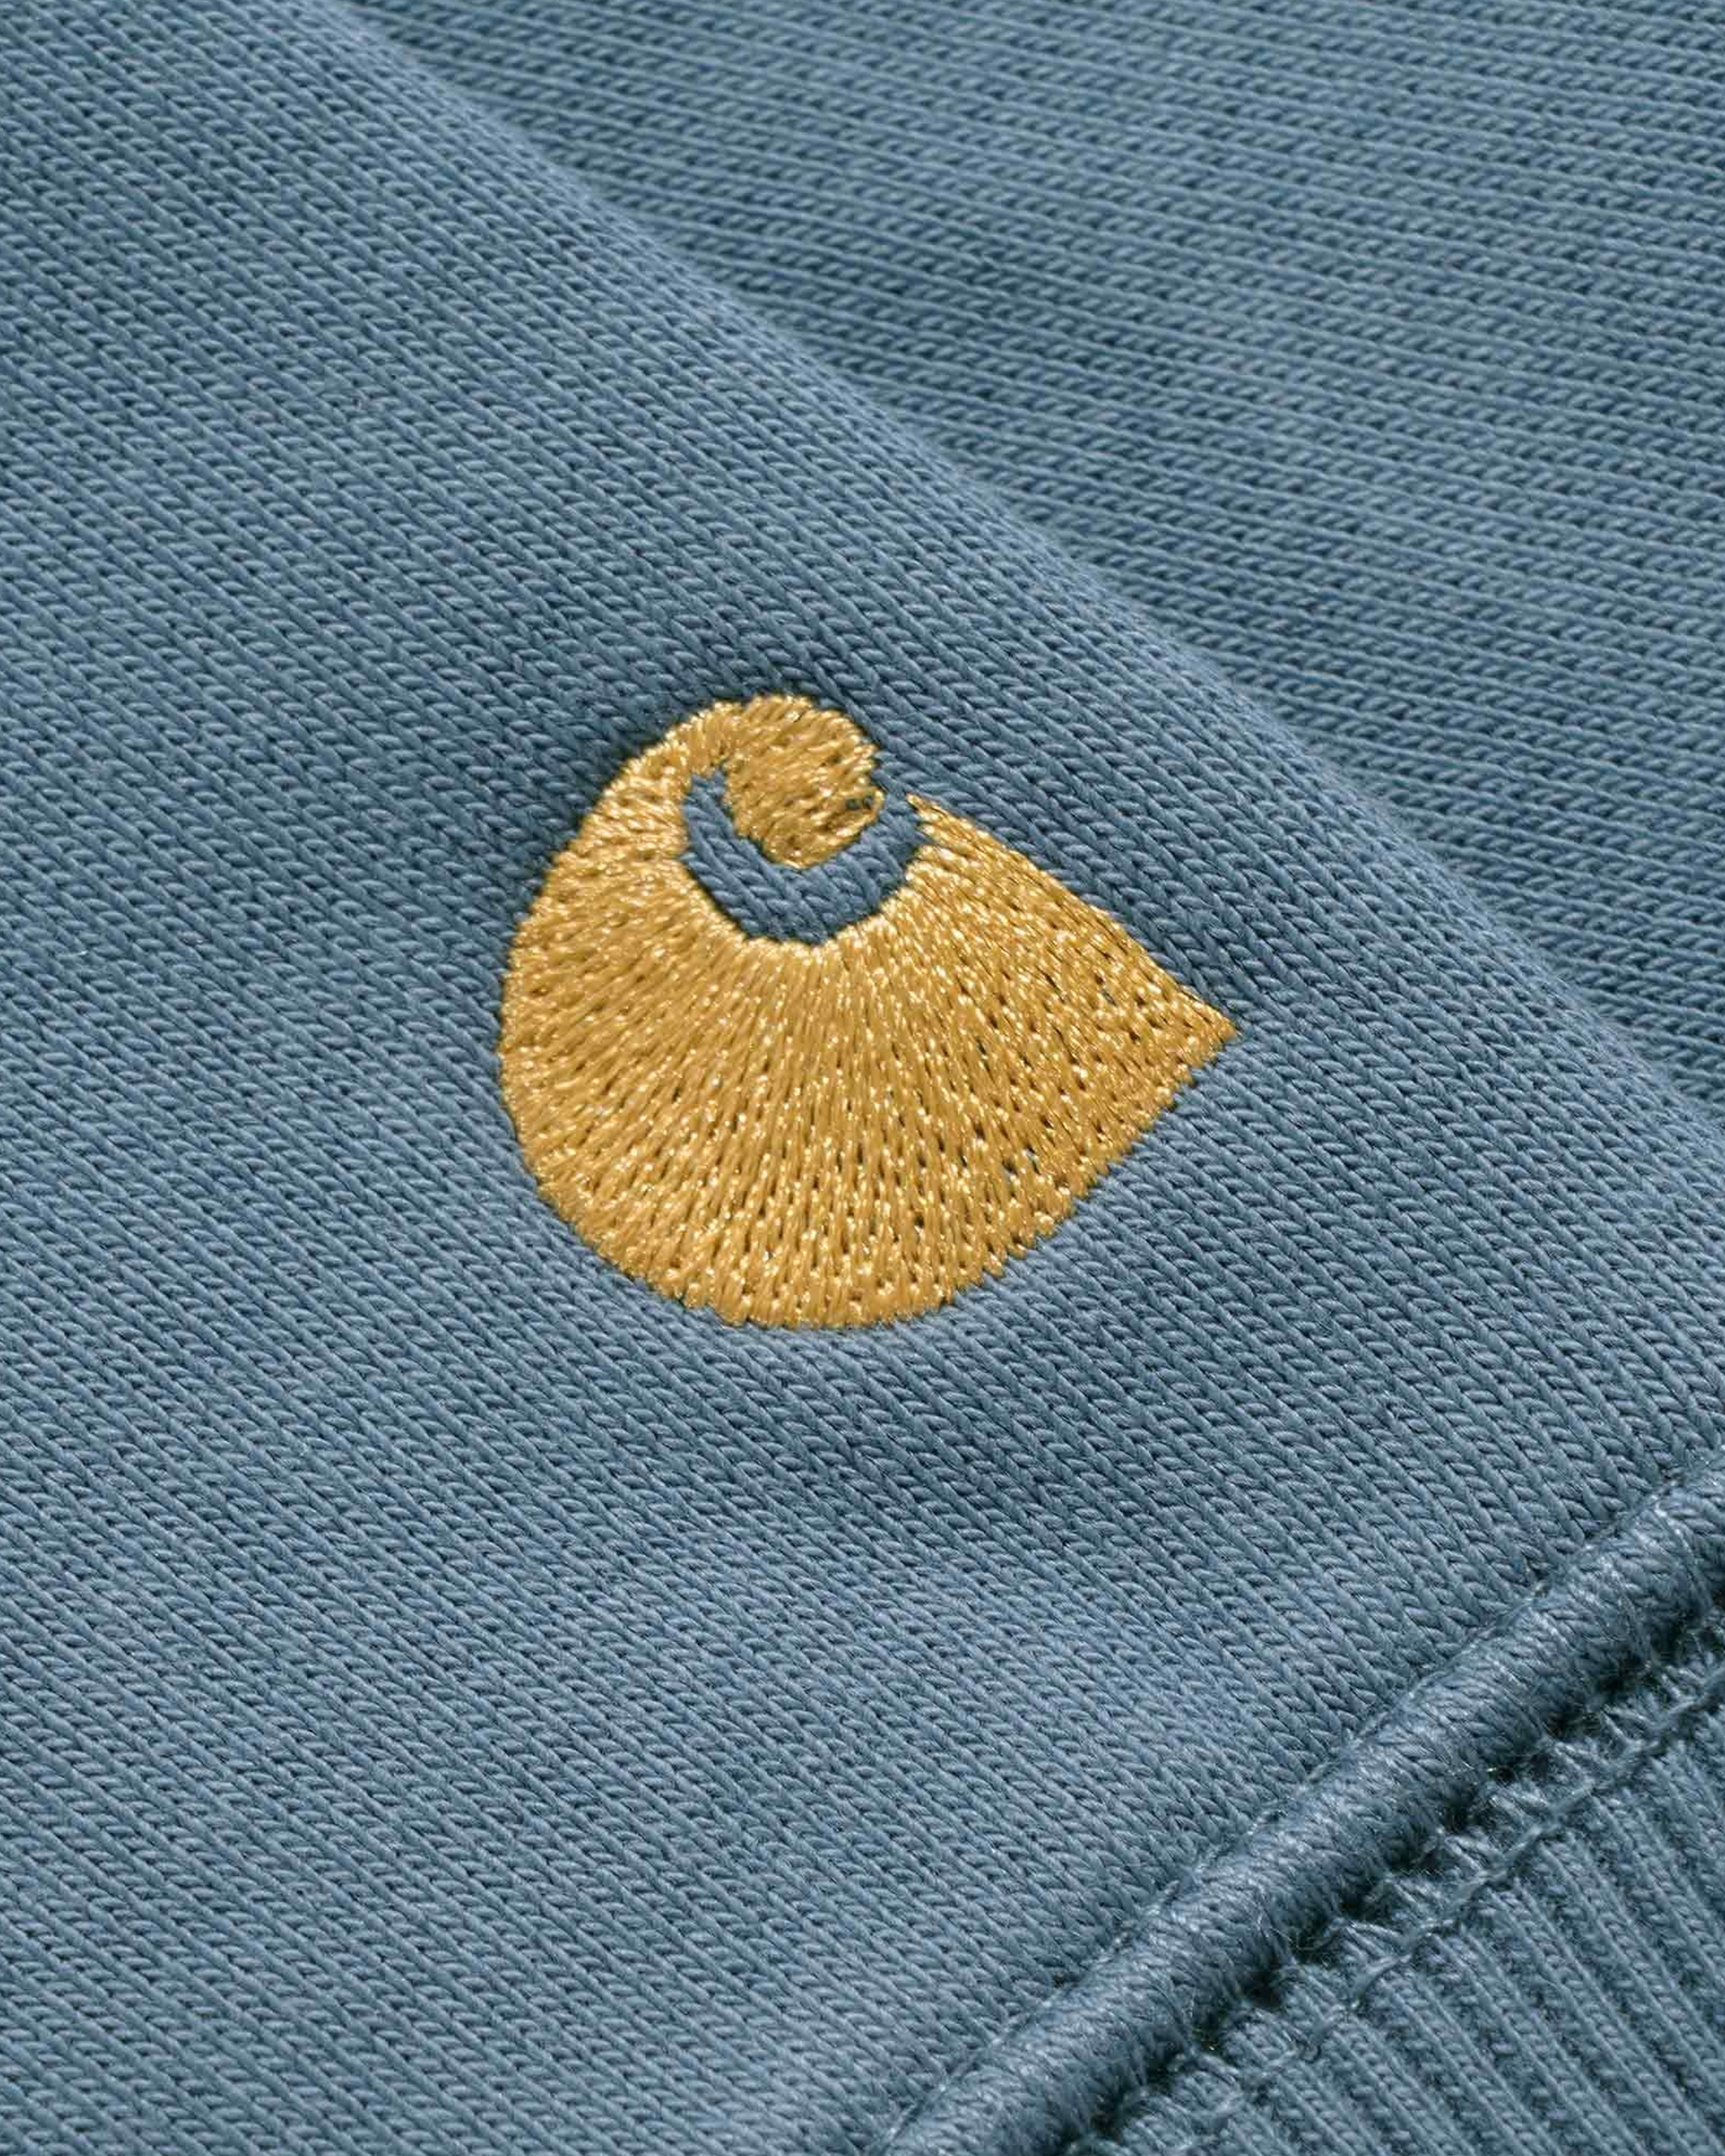 Chase Hooded Sweatshirt - Storm Blue / Gold